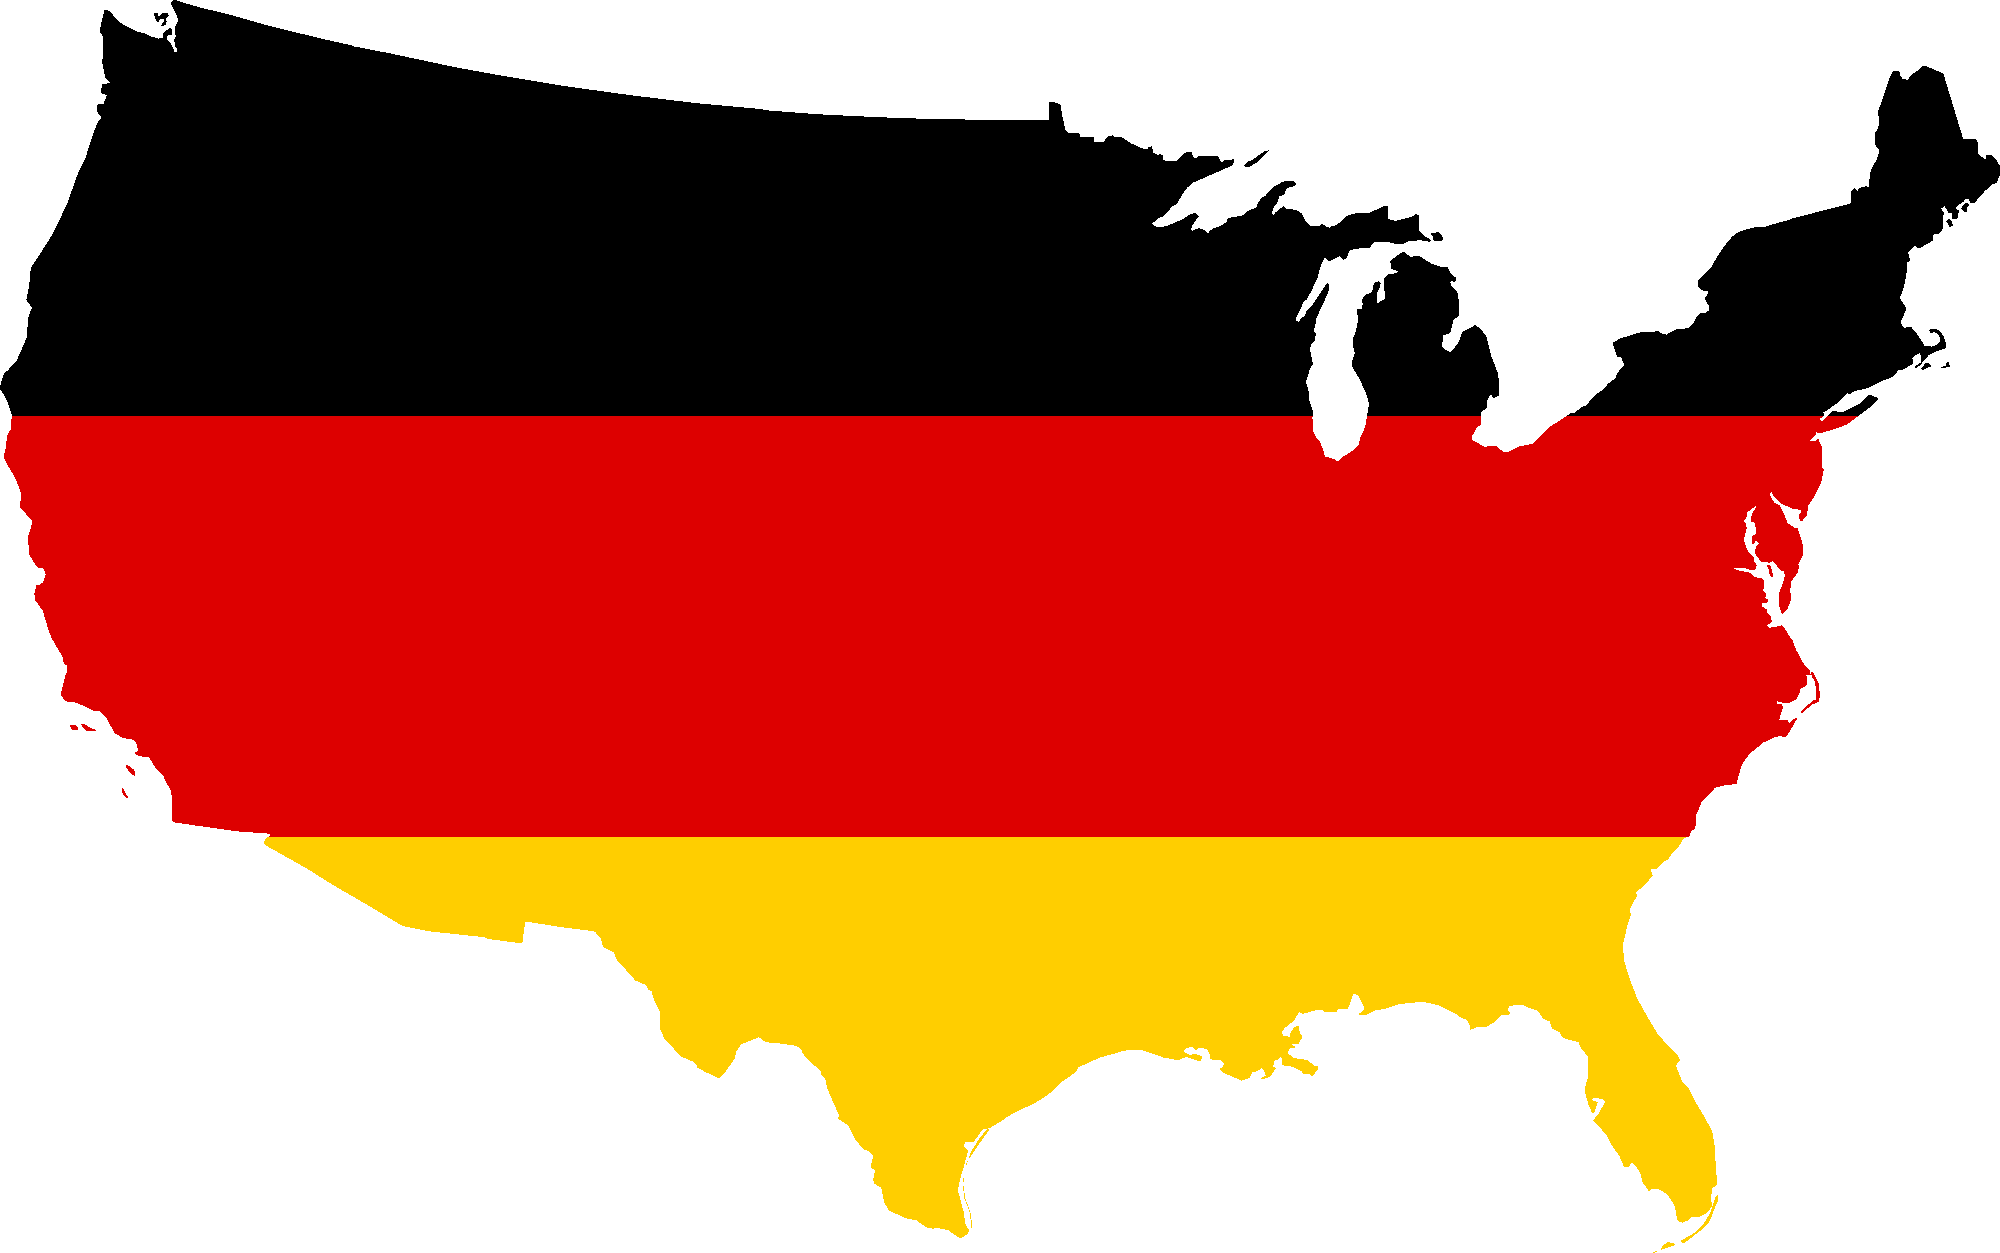 Graduate Research Assistantship in Developing Countries (GRAID) Program in Germany